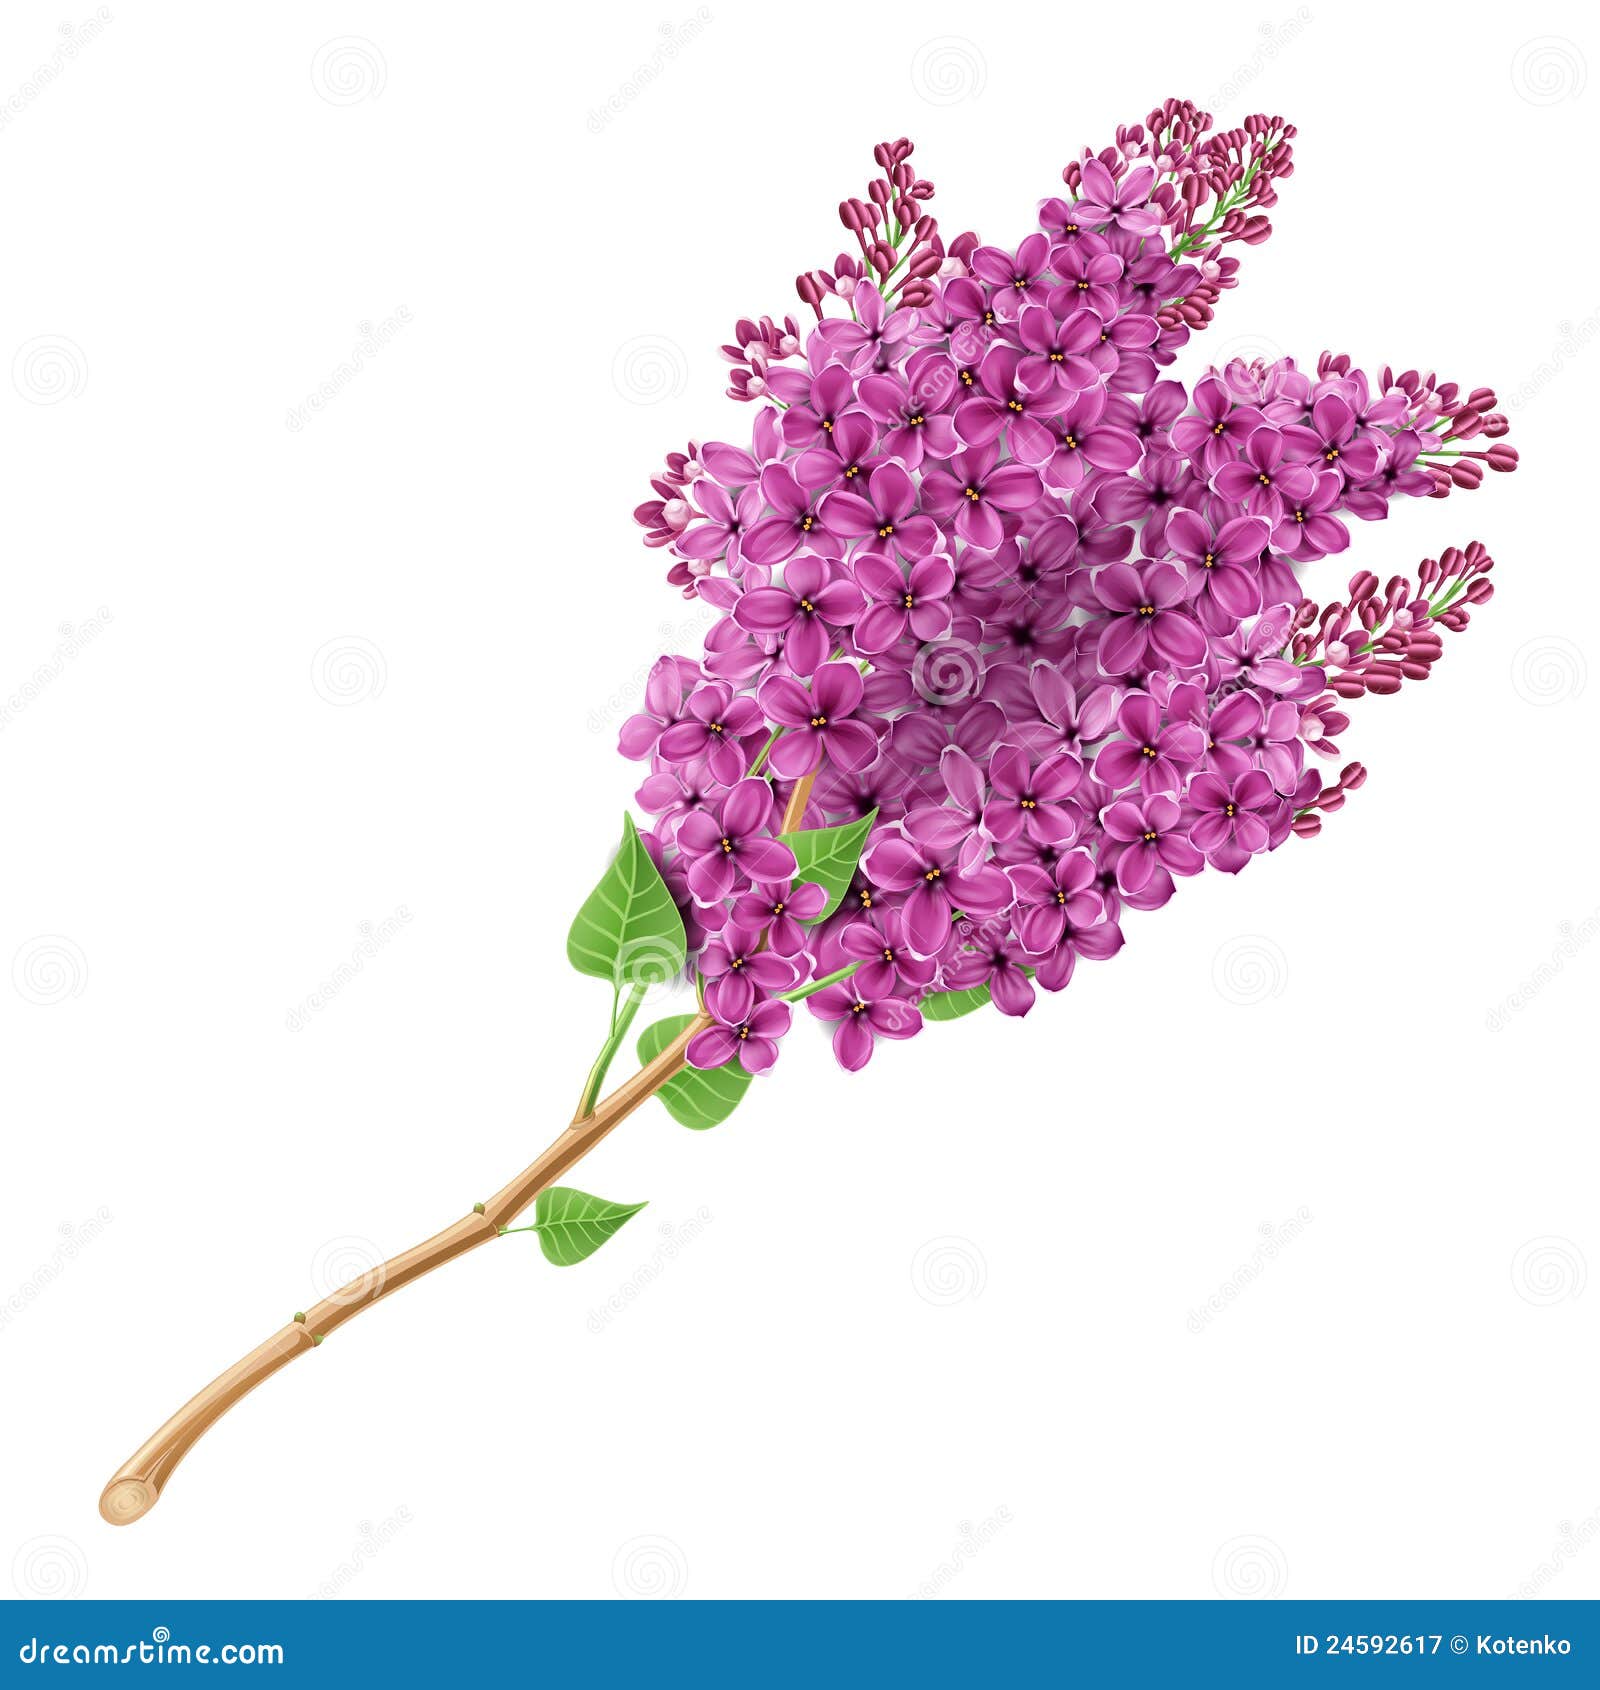 Blooming lilacs stock vector. Illustration of bloom, flowering - 24592617